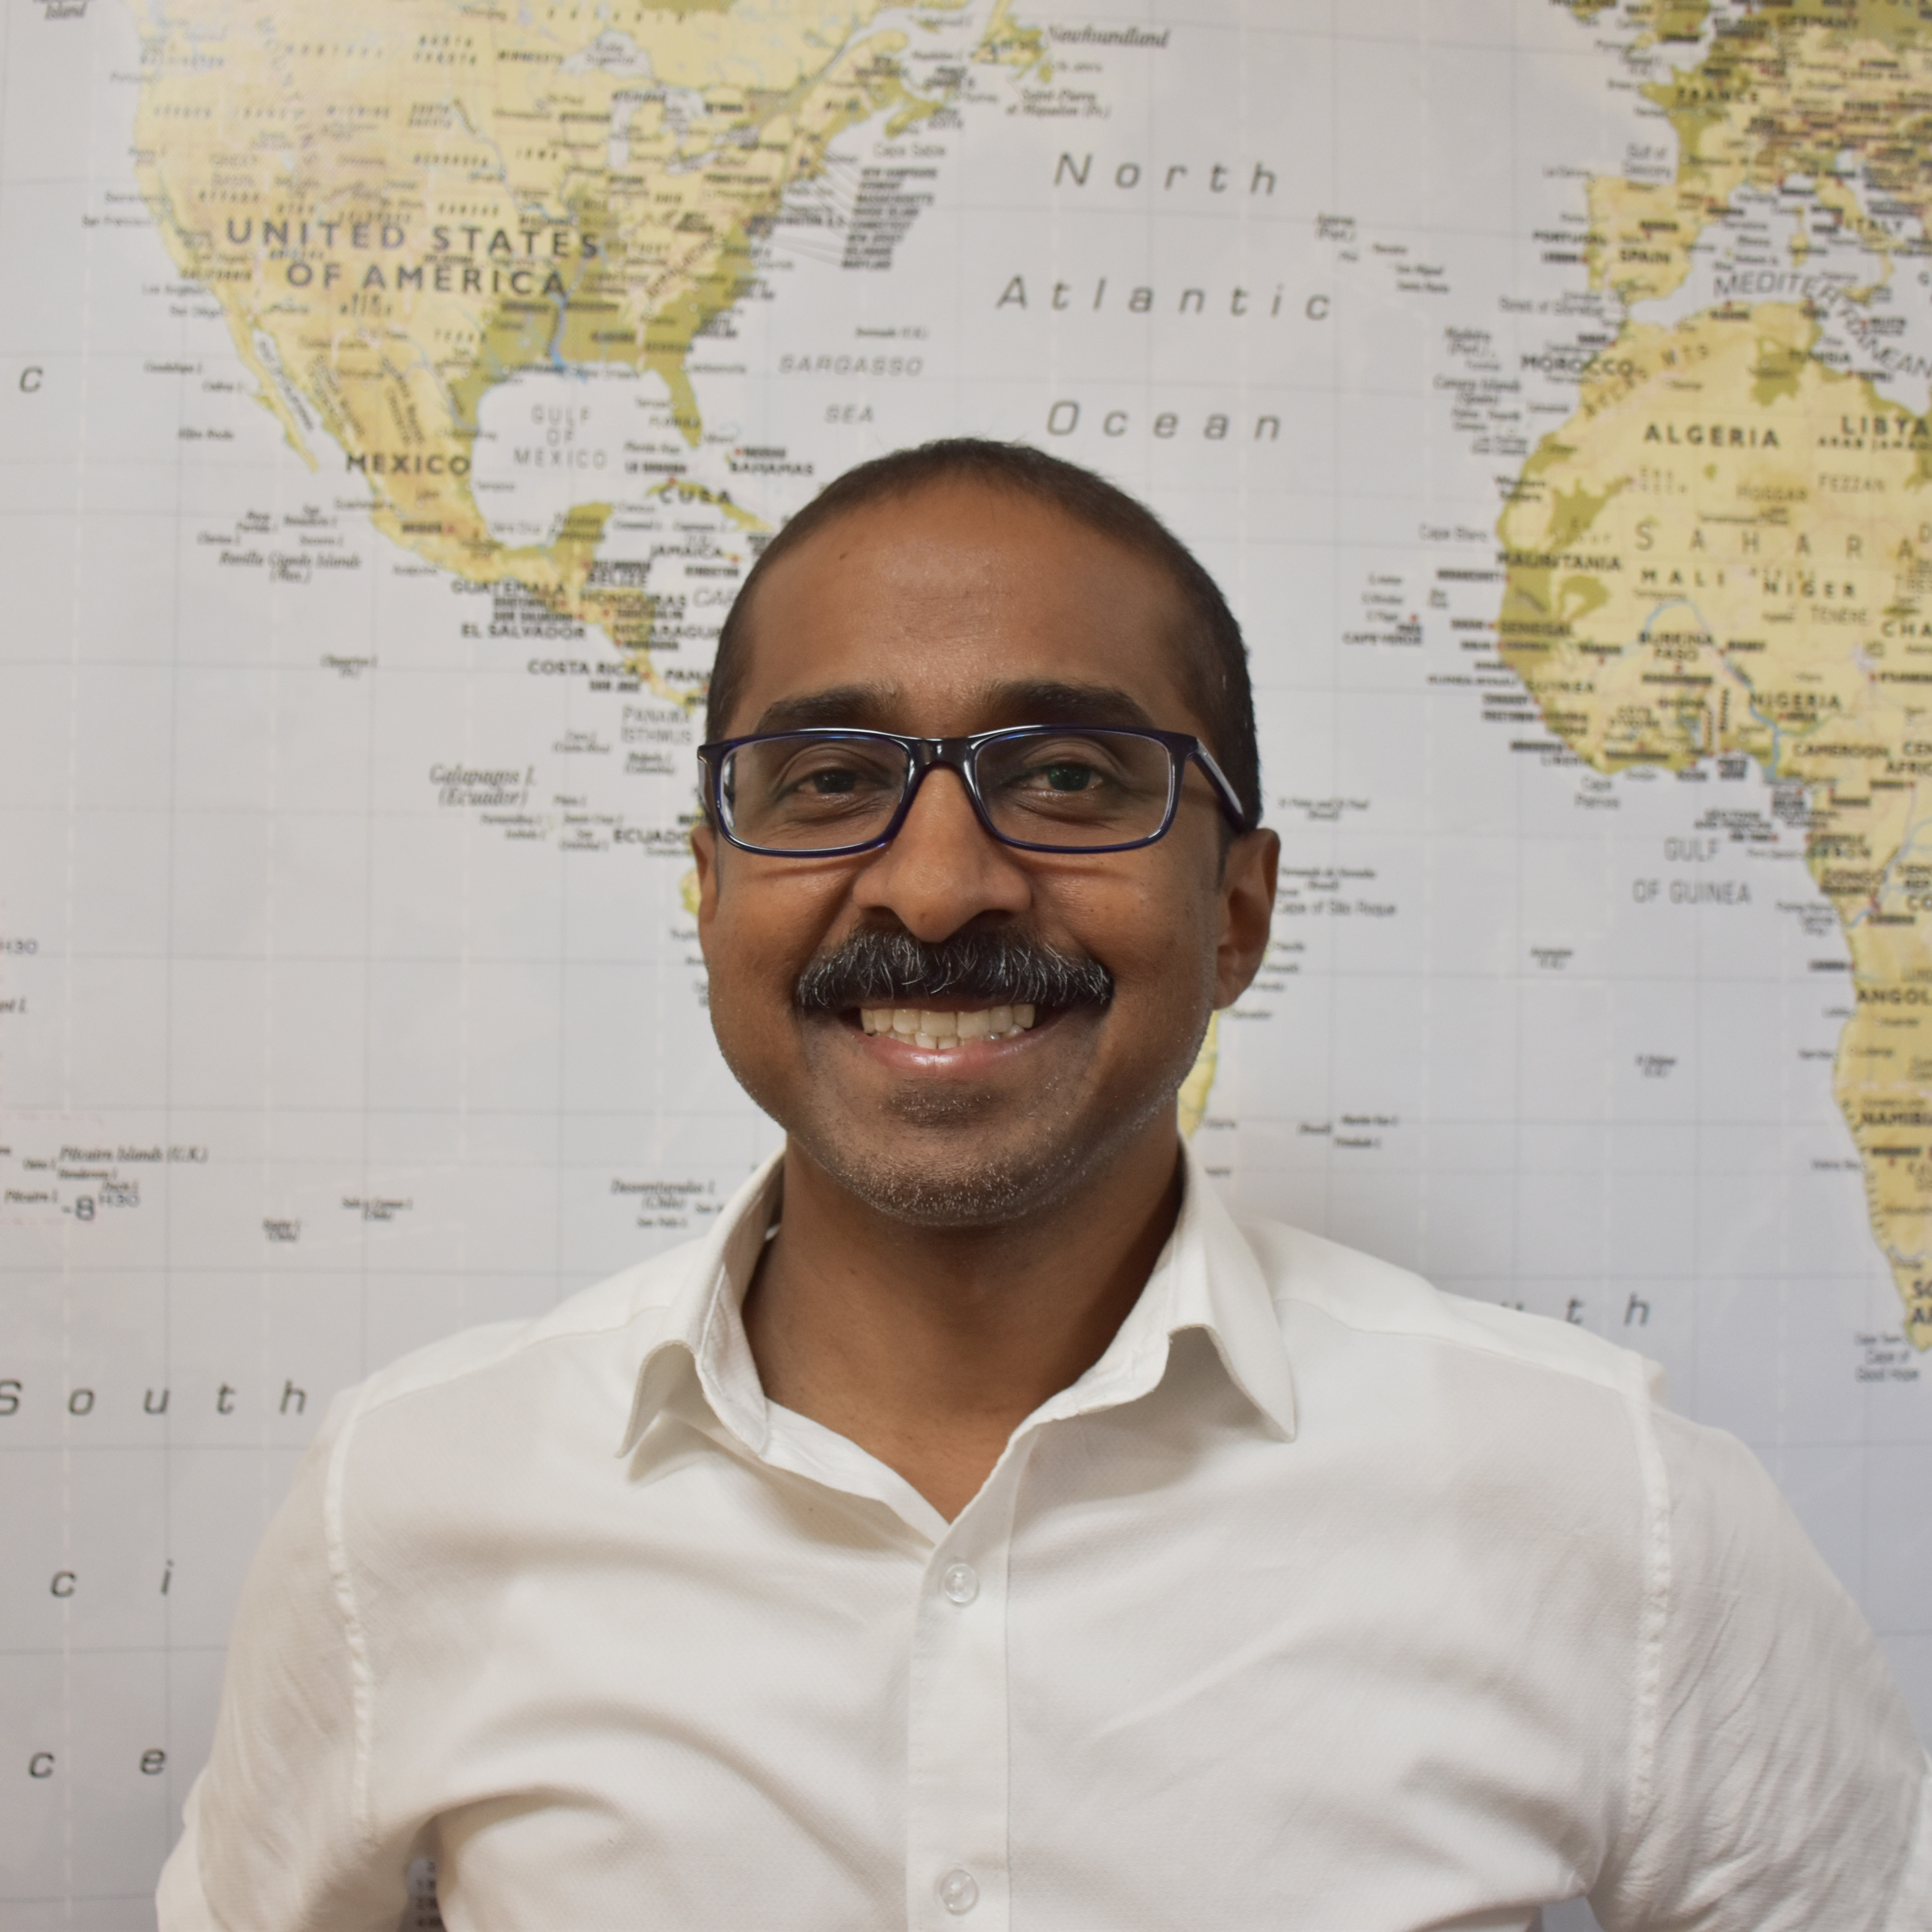 Jay Arasan, Associate Director smiling in front of world map